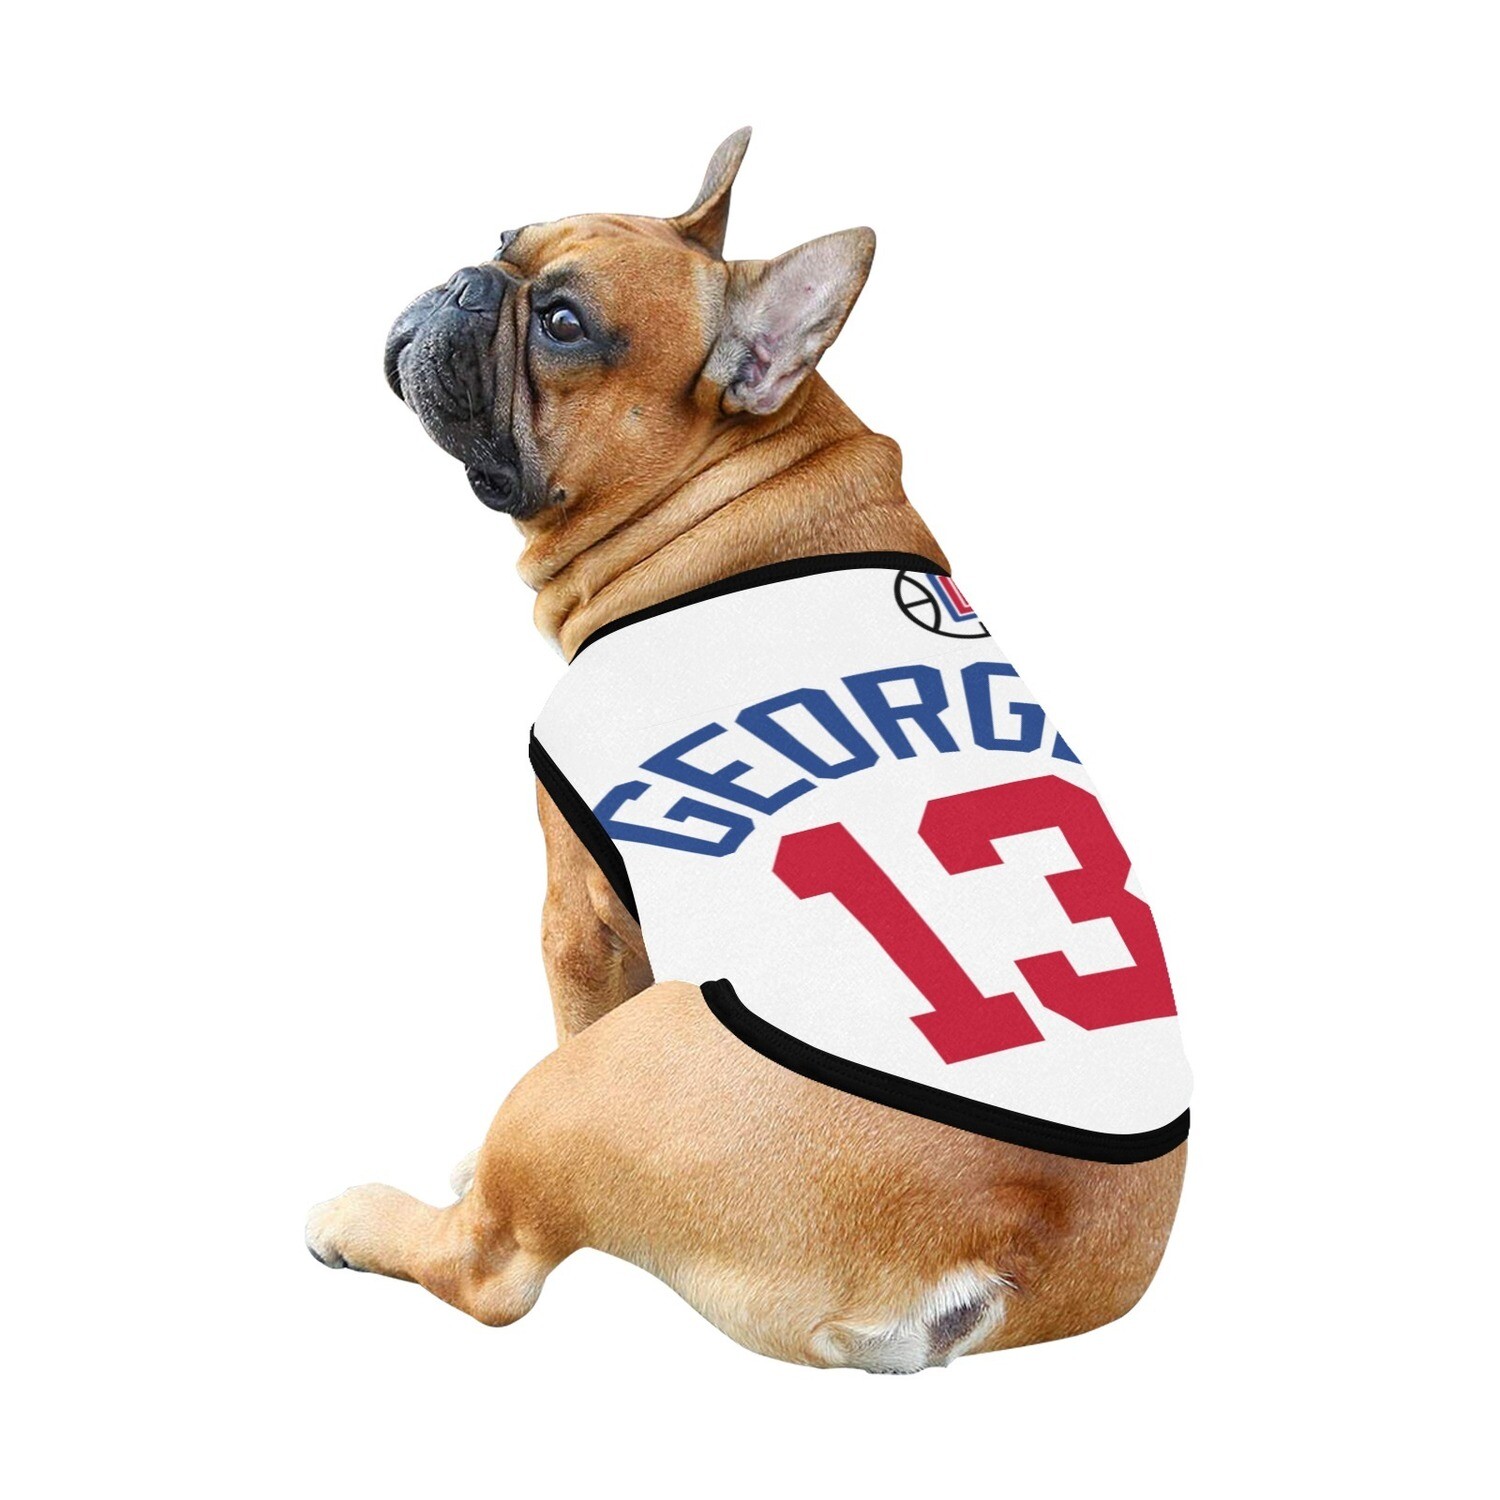 🐕 LA Clippers George 13 Dog t-shirt, Dog Tank Top, Dog shirt, Dog clothes, Gifts, front back print, 7 sizes XS to 3XL, dog t-shirt, white